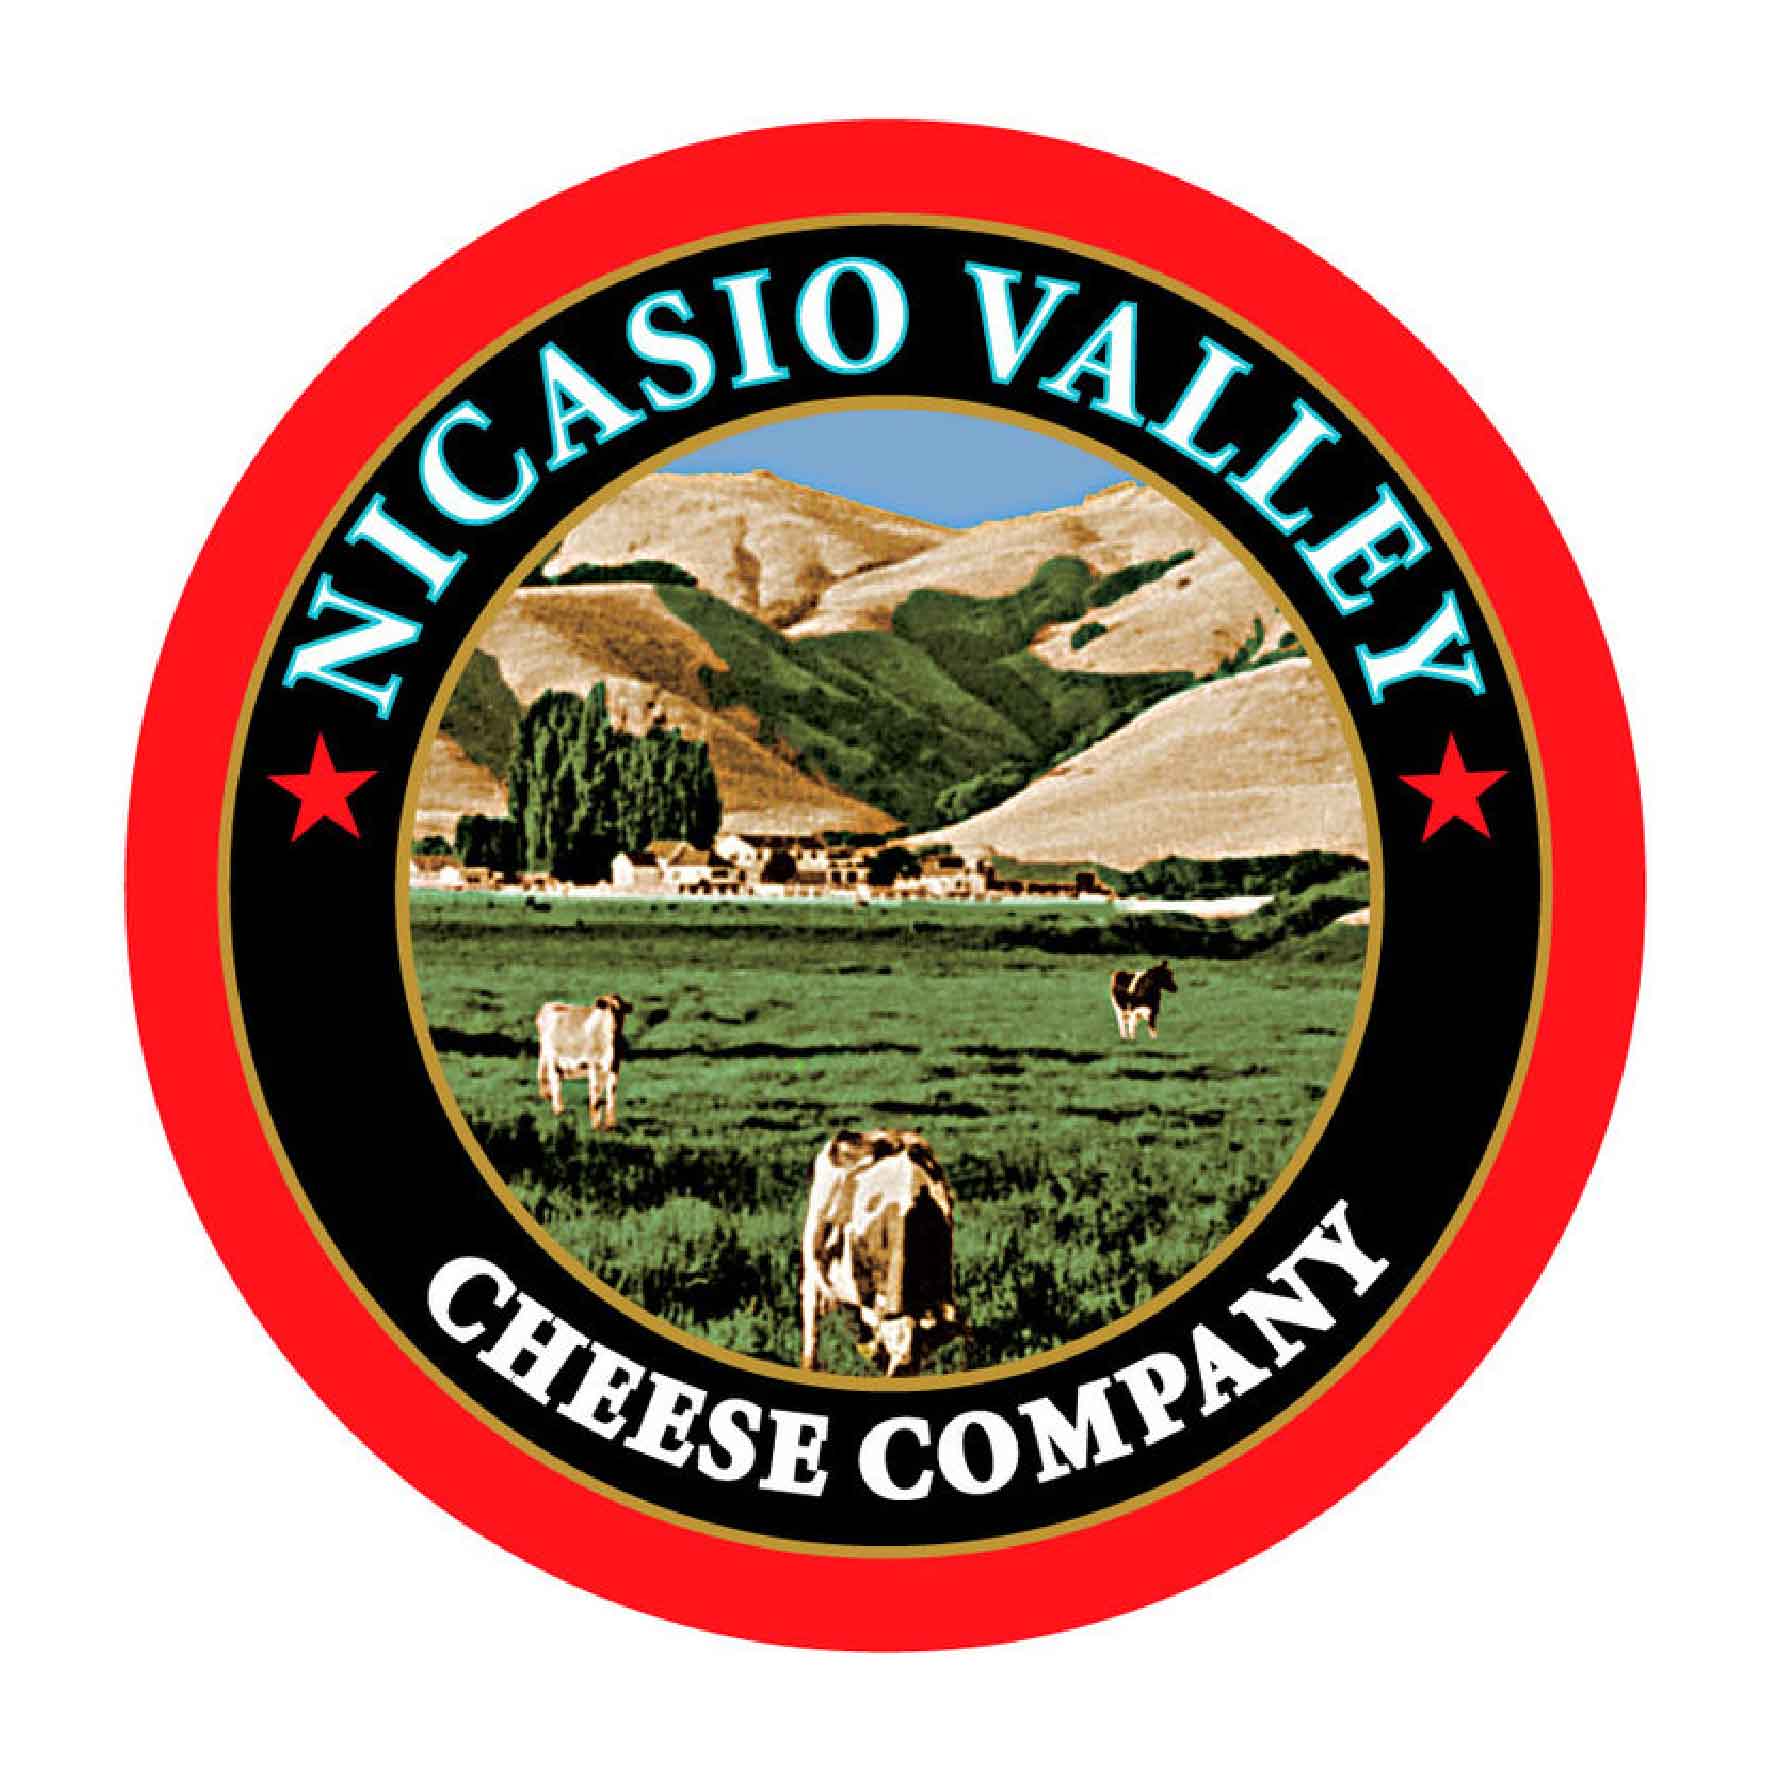 Nicasio Valley Cheese Company Logo